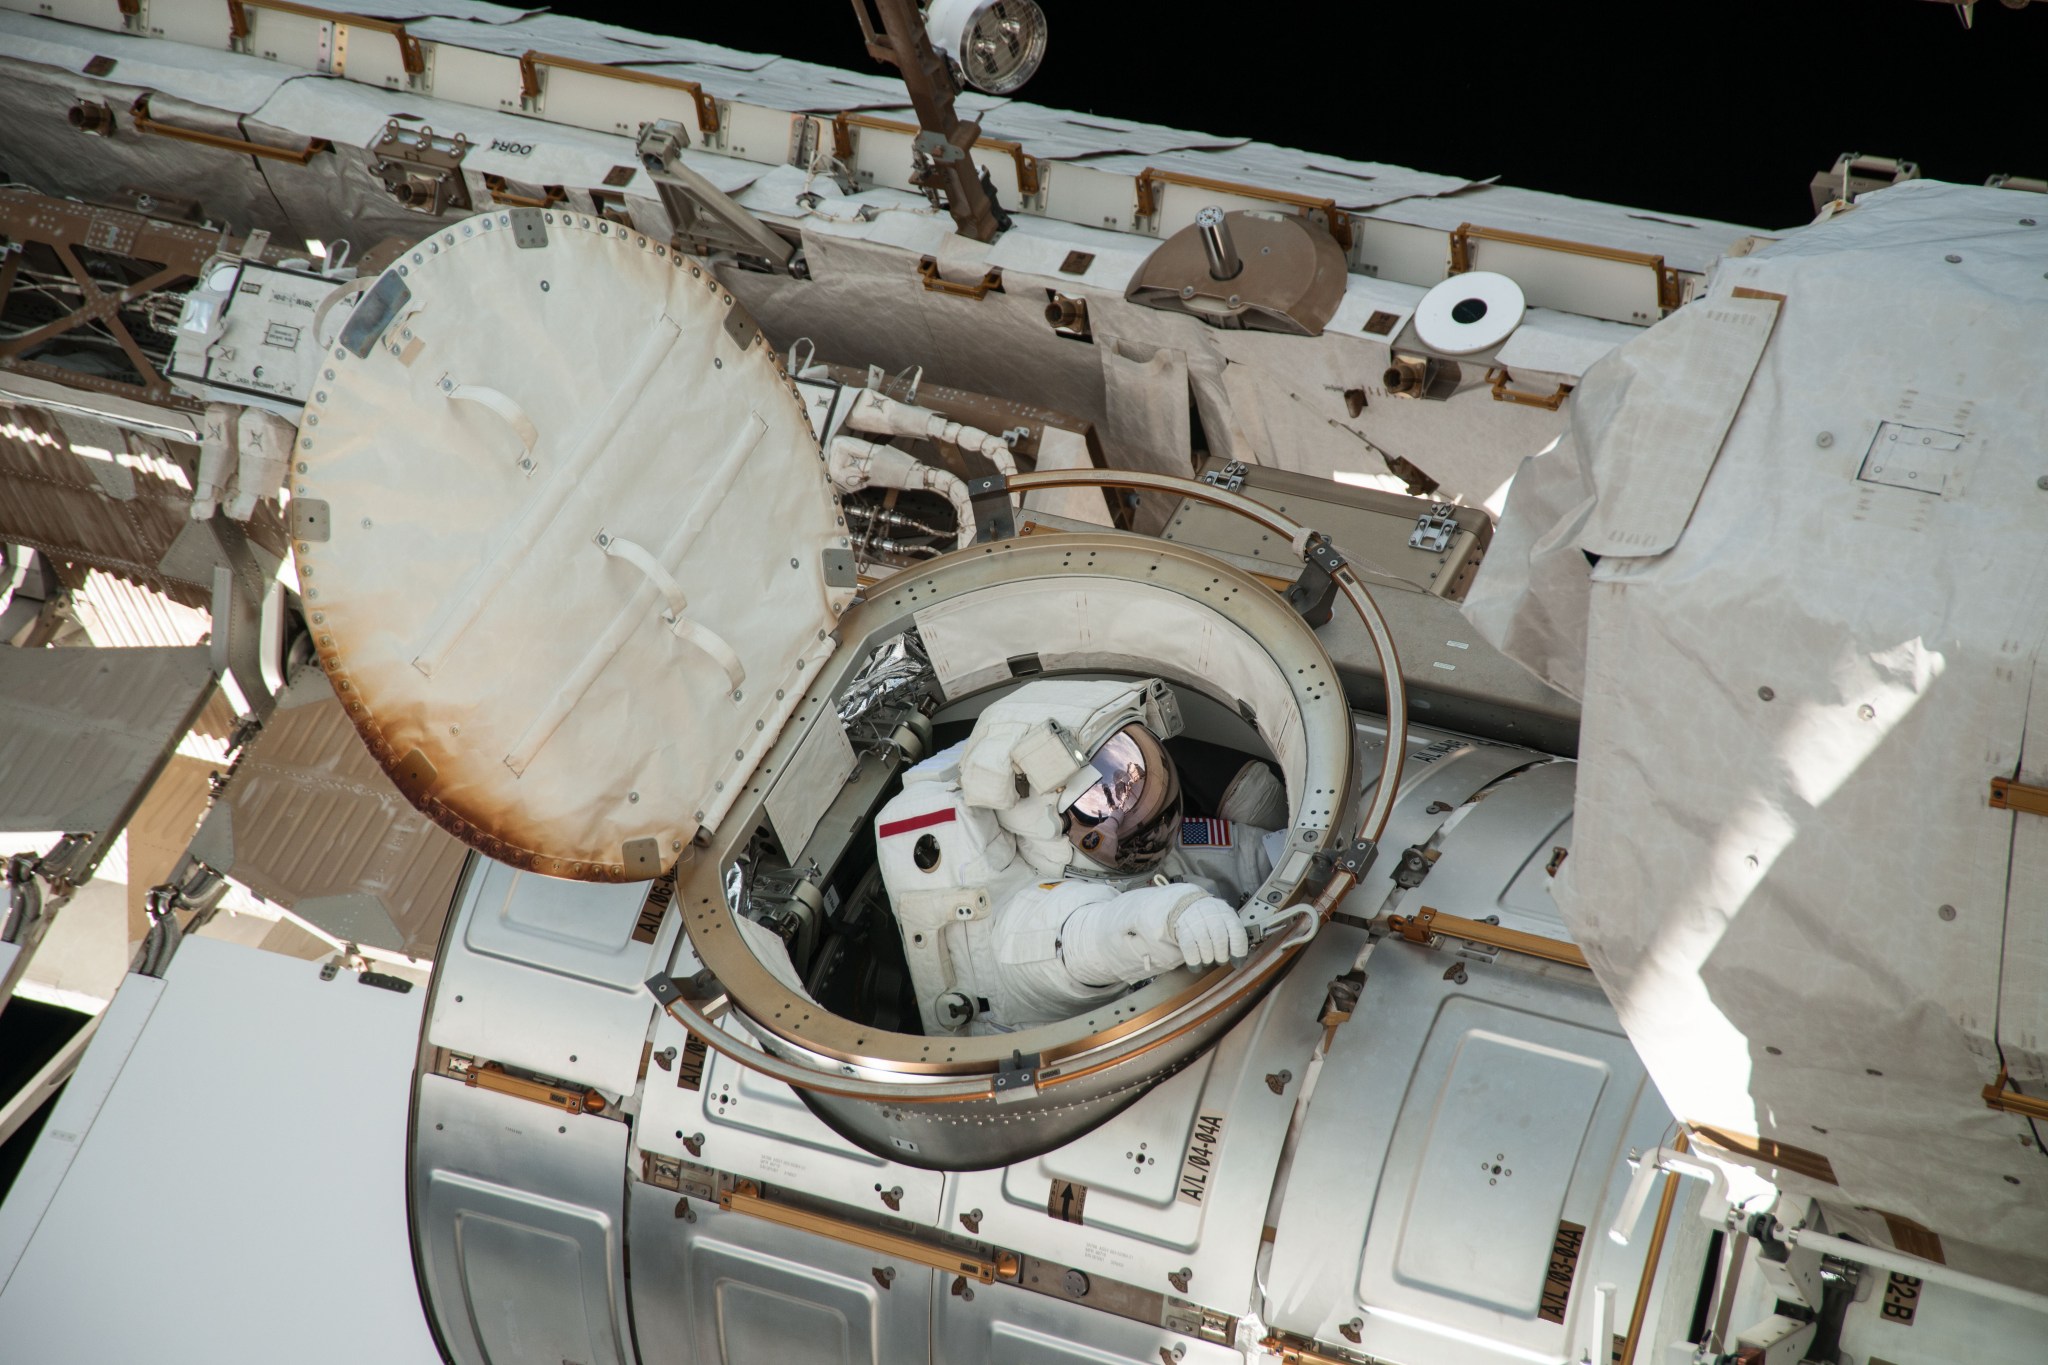 Astronaut wearing a bulky white spacesuit looks out at space from the open hatch of the space station's airlock